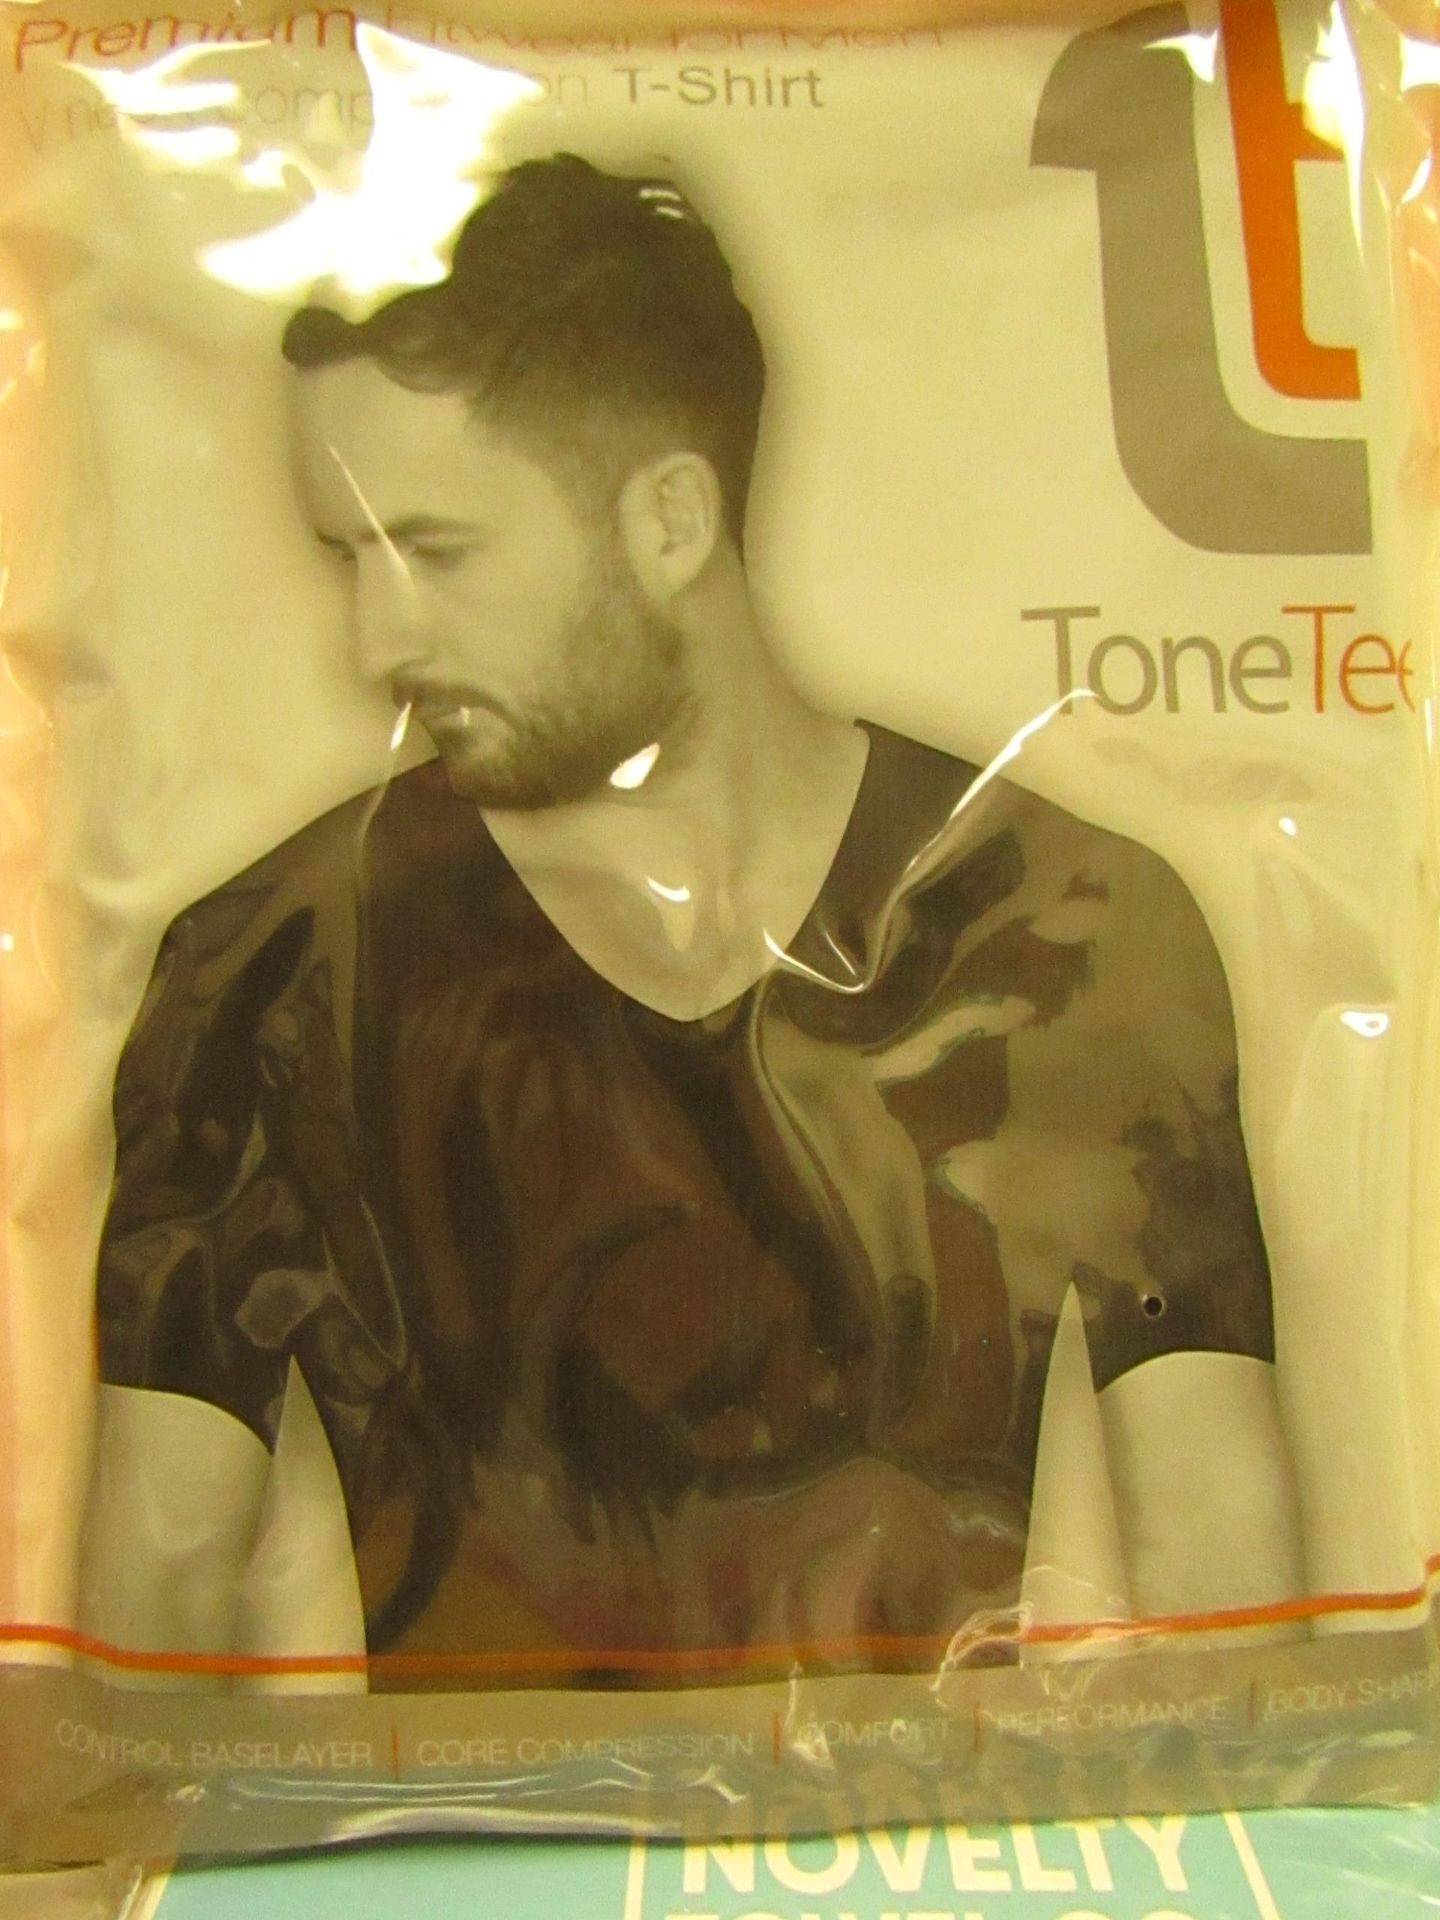 | 1x | MENS TONE TEE NECK COMPRESSION T-SHIRT BLACK SIZE XXXL | NEW & PACKAGED |